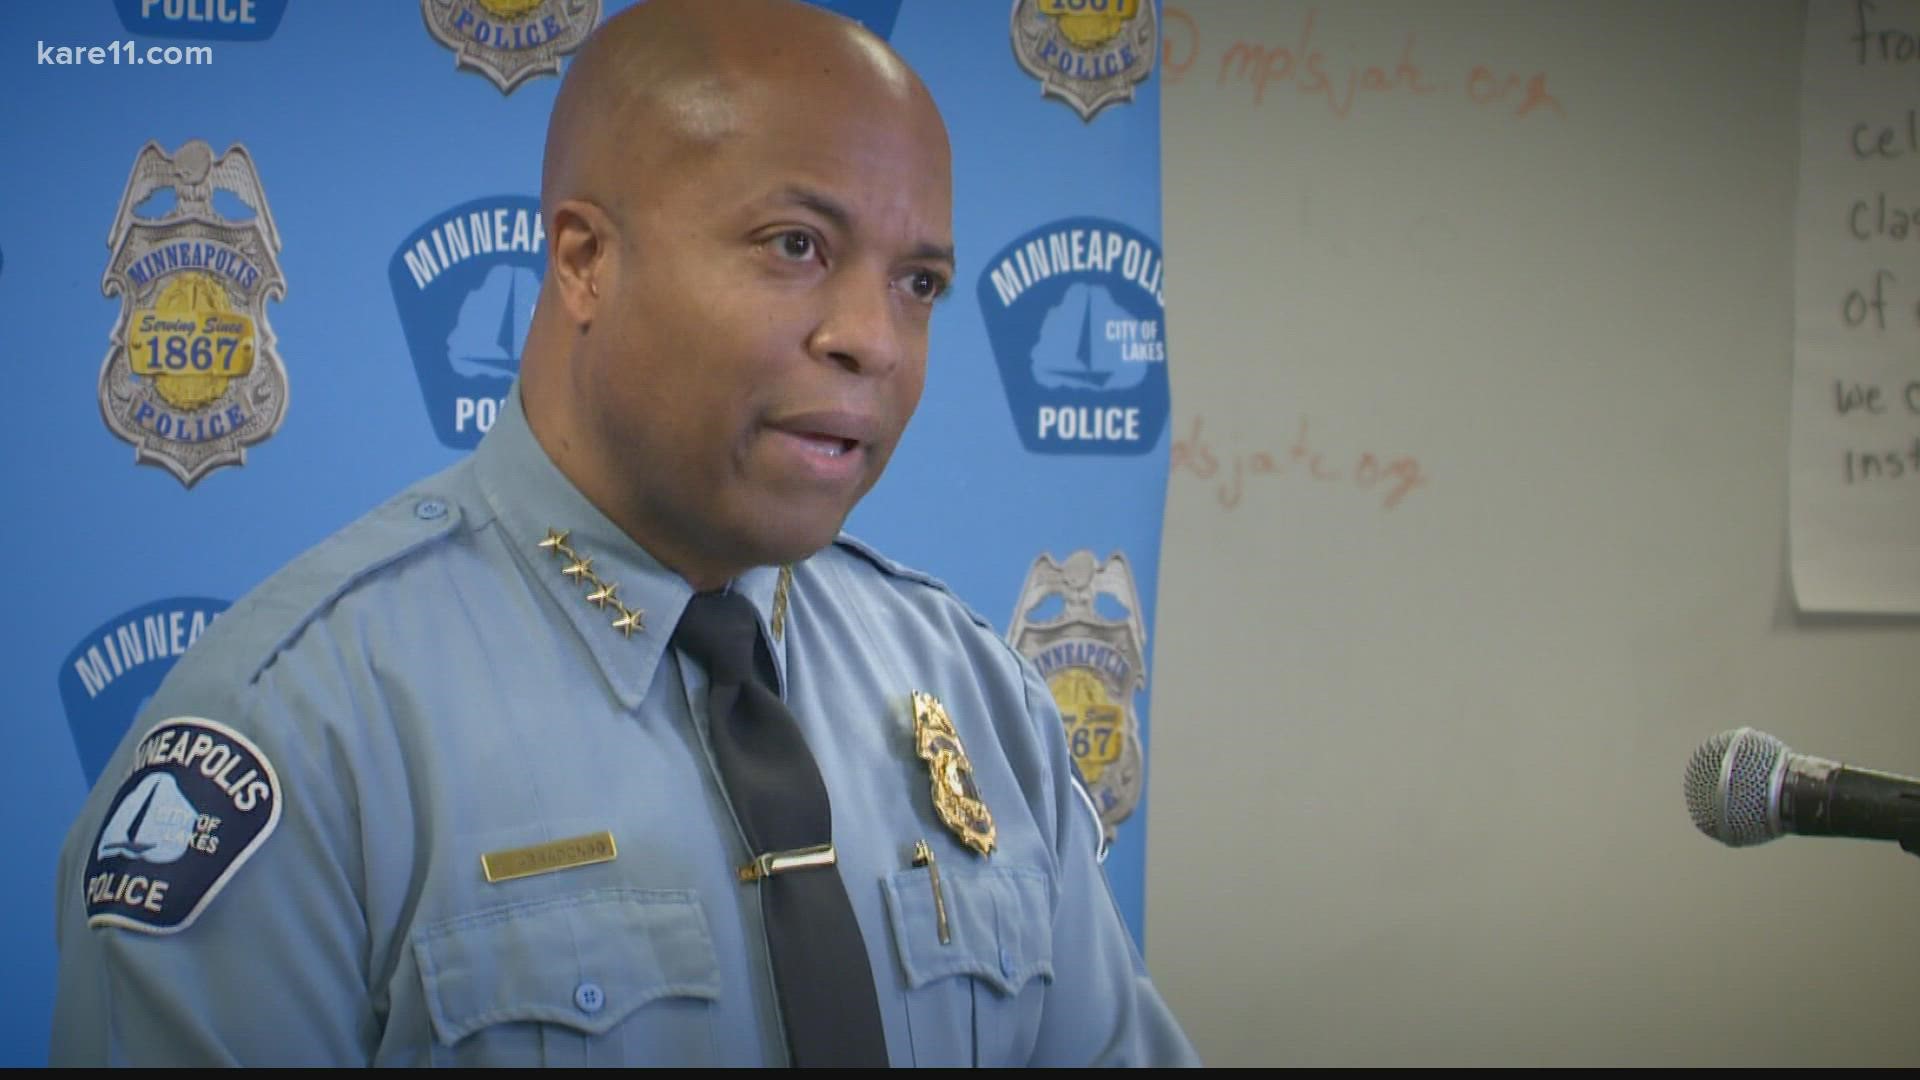 After 32 years in an MPD uniform, Chief Medaria Arradando says it's the best thing for him personally to move on from the police force.